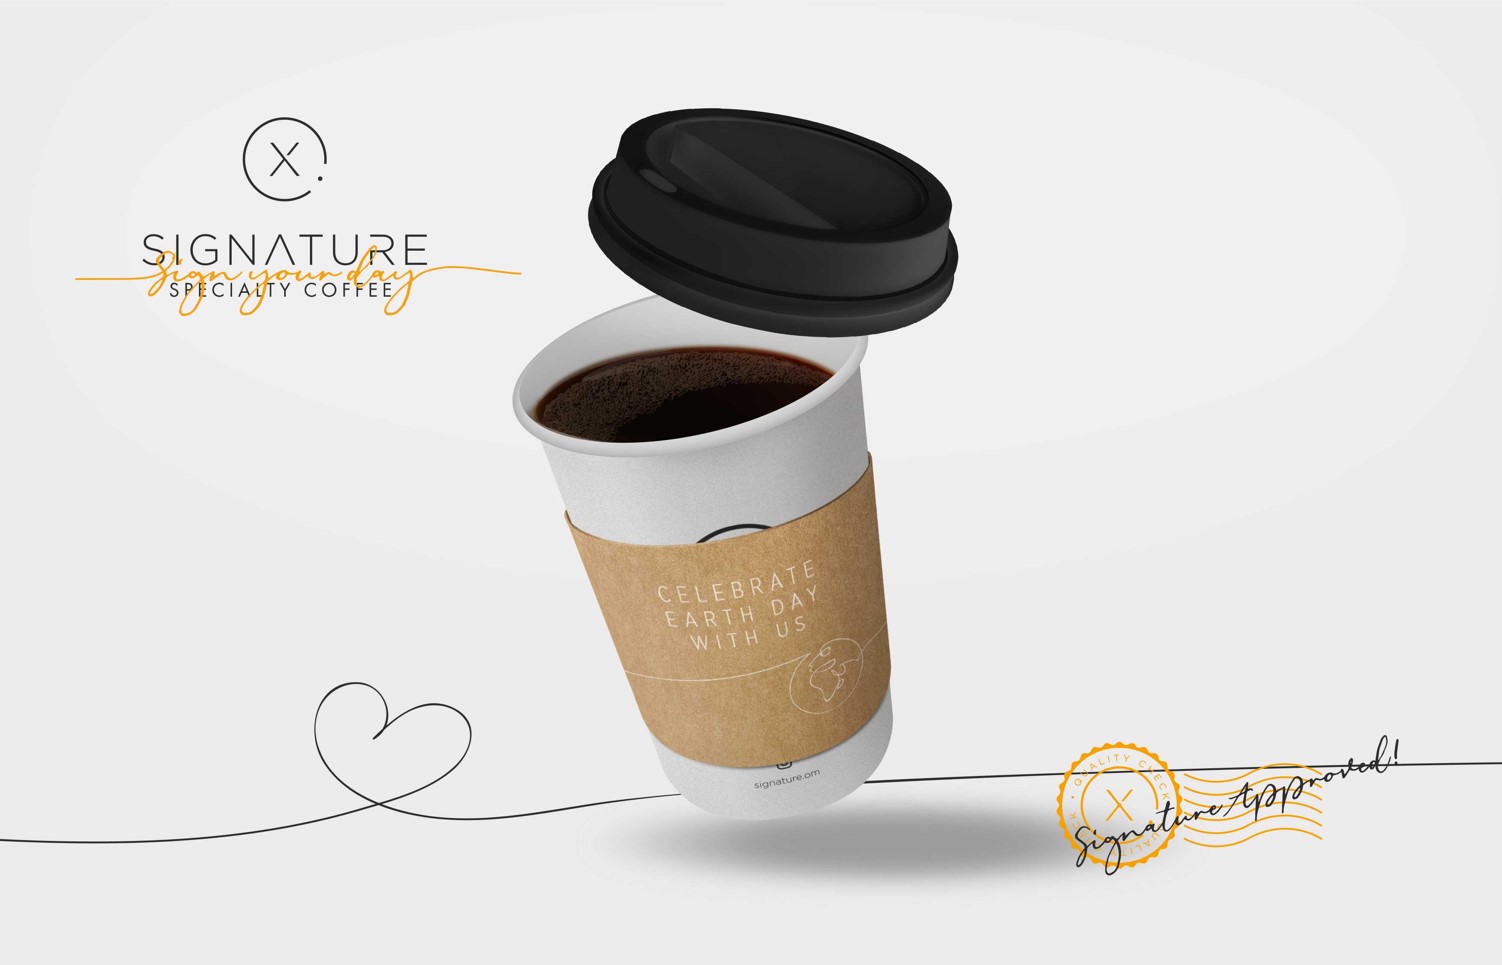 Signature Cafe // Sign Your Day Rebranding Campaign // Oman